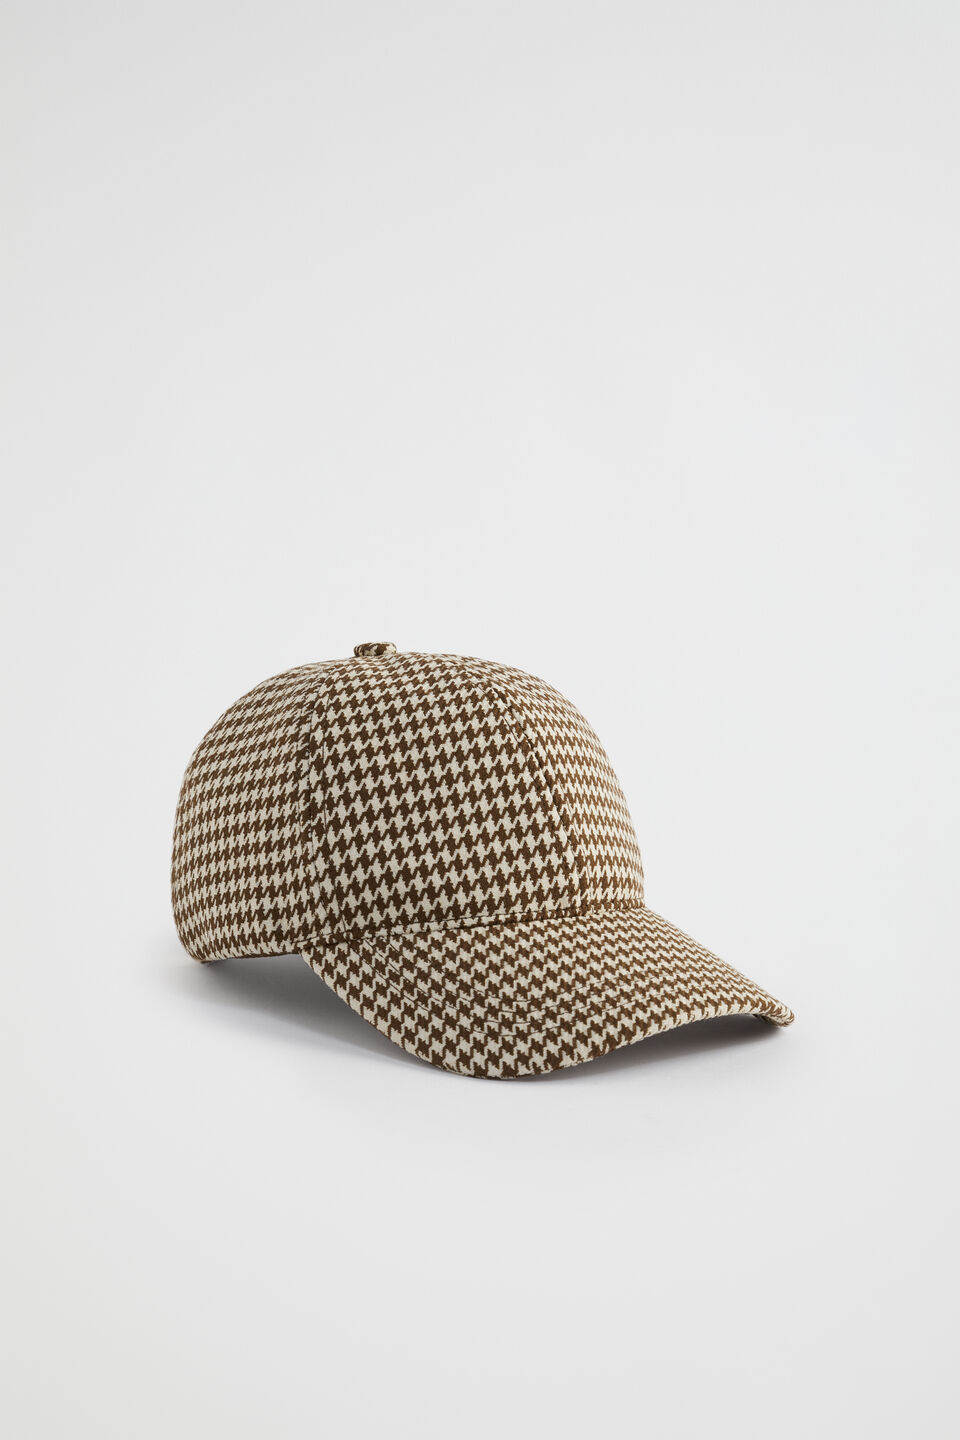 Houndstooth Cap  Hot Chocolate Houndstooth